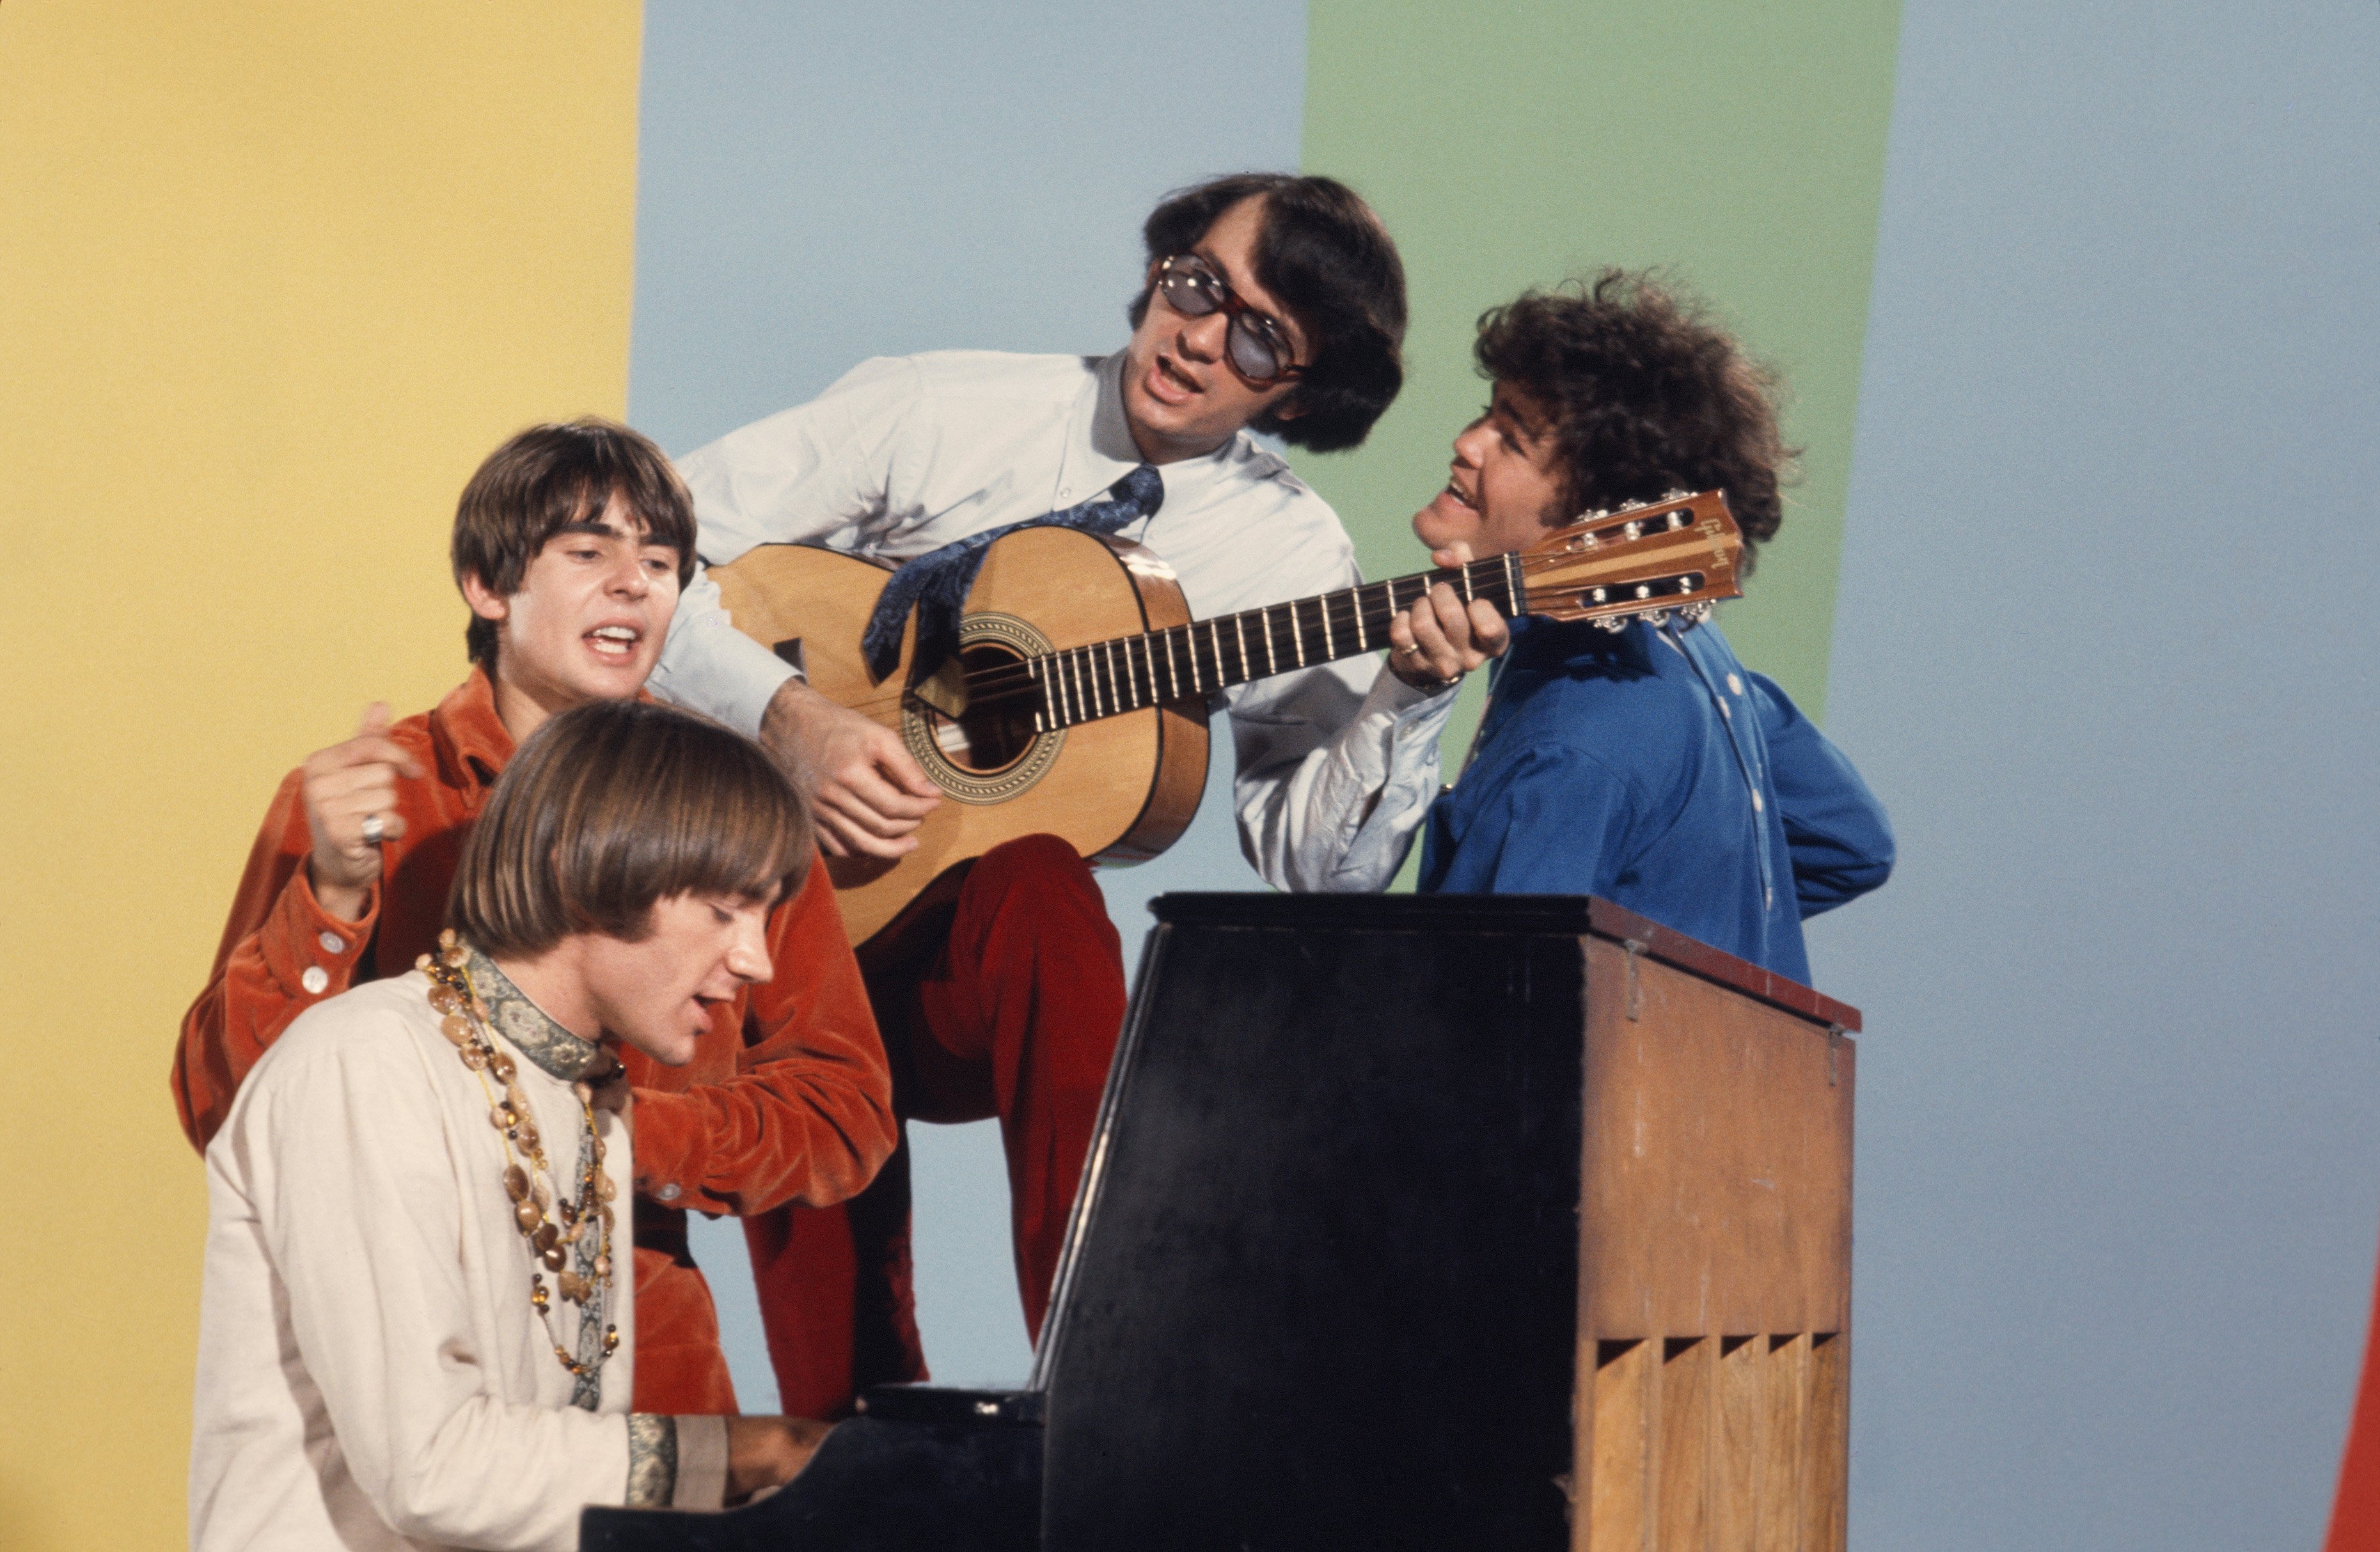 The Monkees' Davy Jones, Peter Tork, Mike Nesmith, and Micky Dolenz at a piano